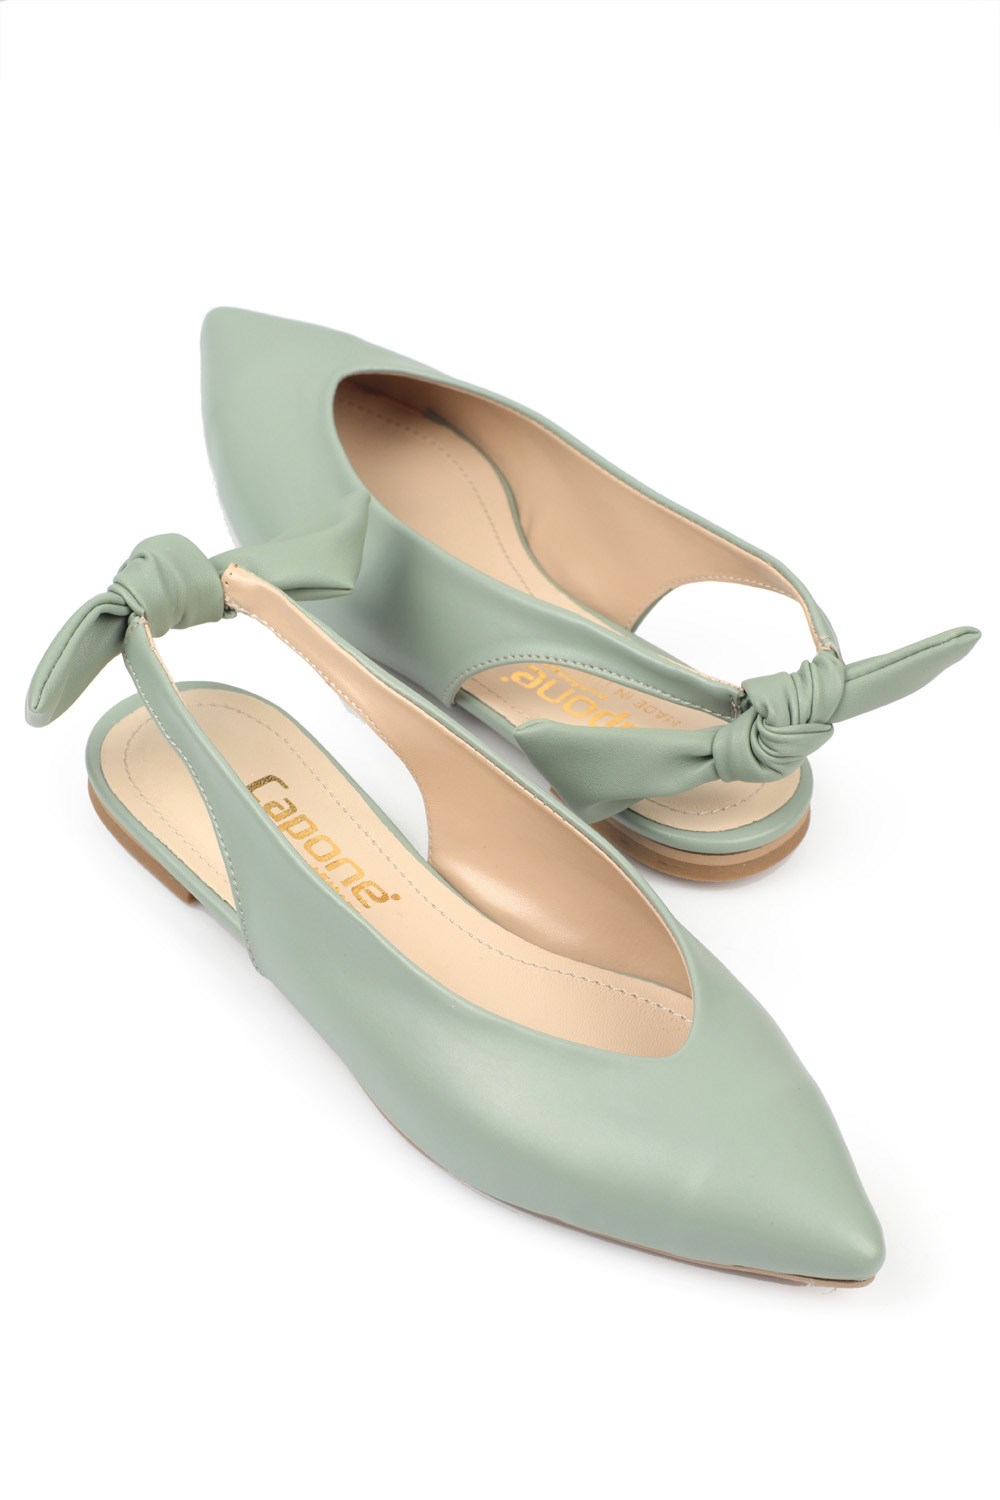 Capone Outfitters 202 Women Mint Green Ballerina | caponeoutfitters.com